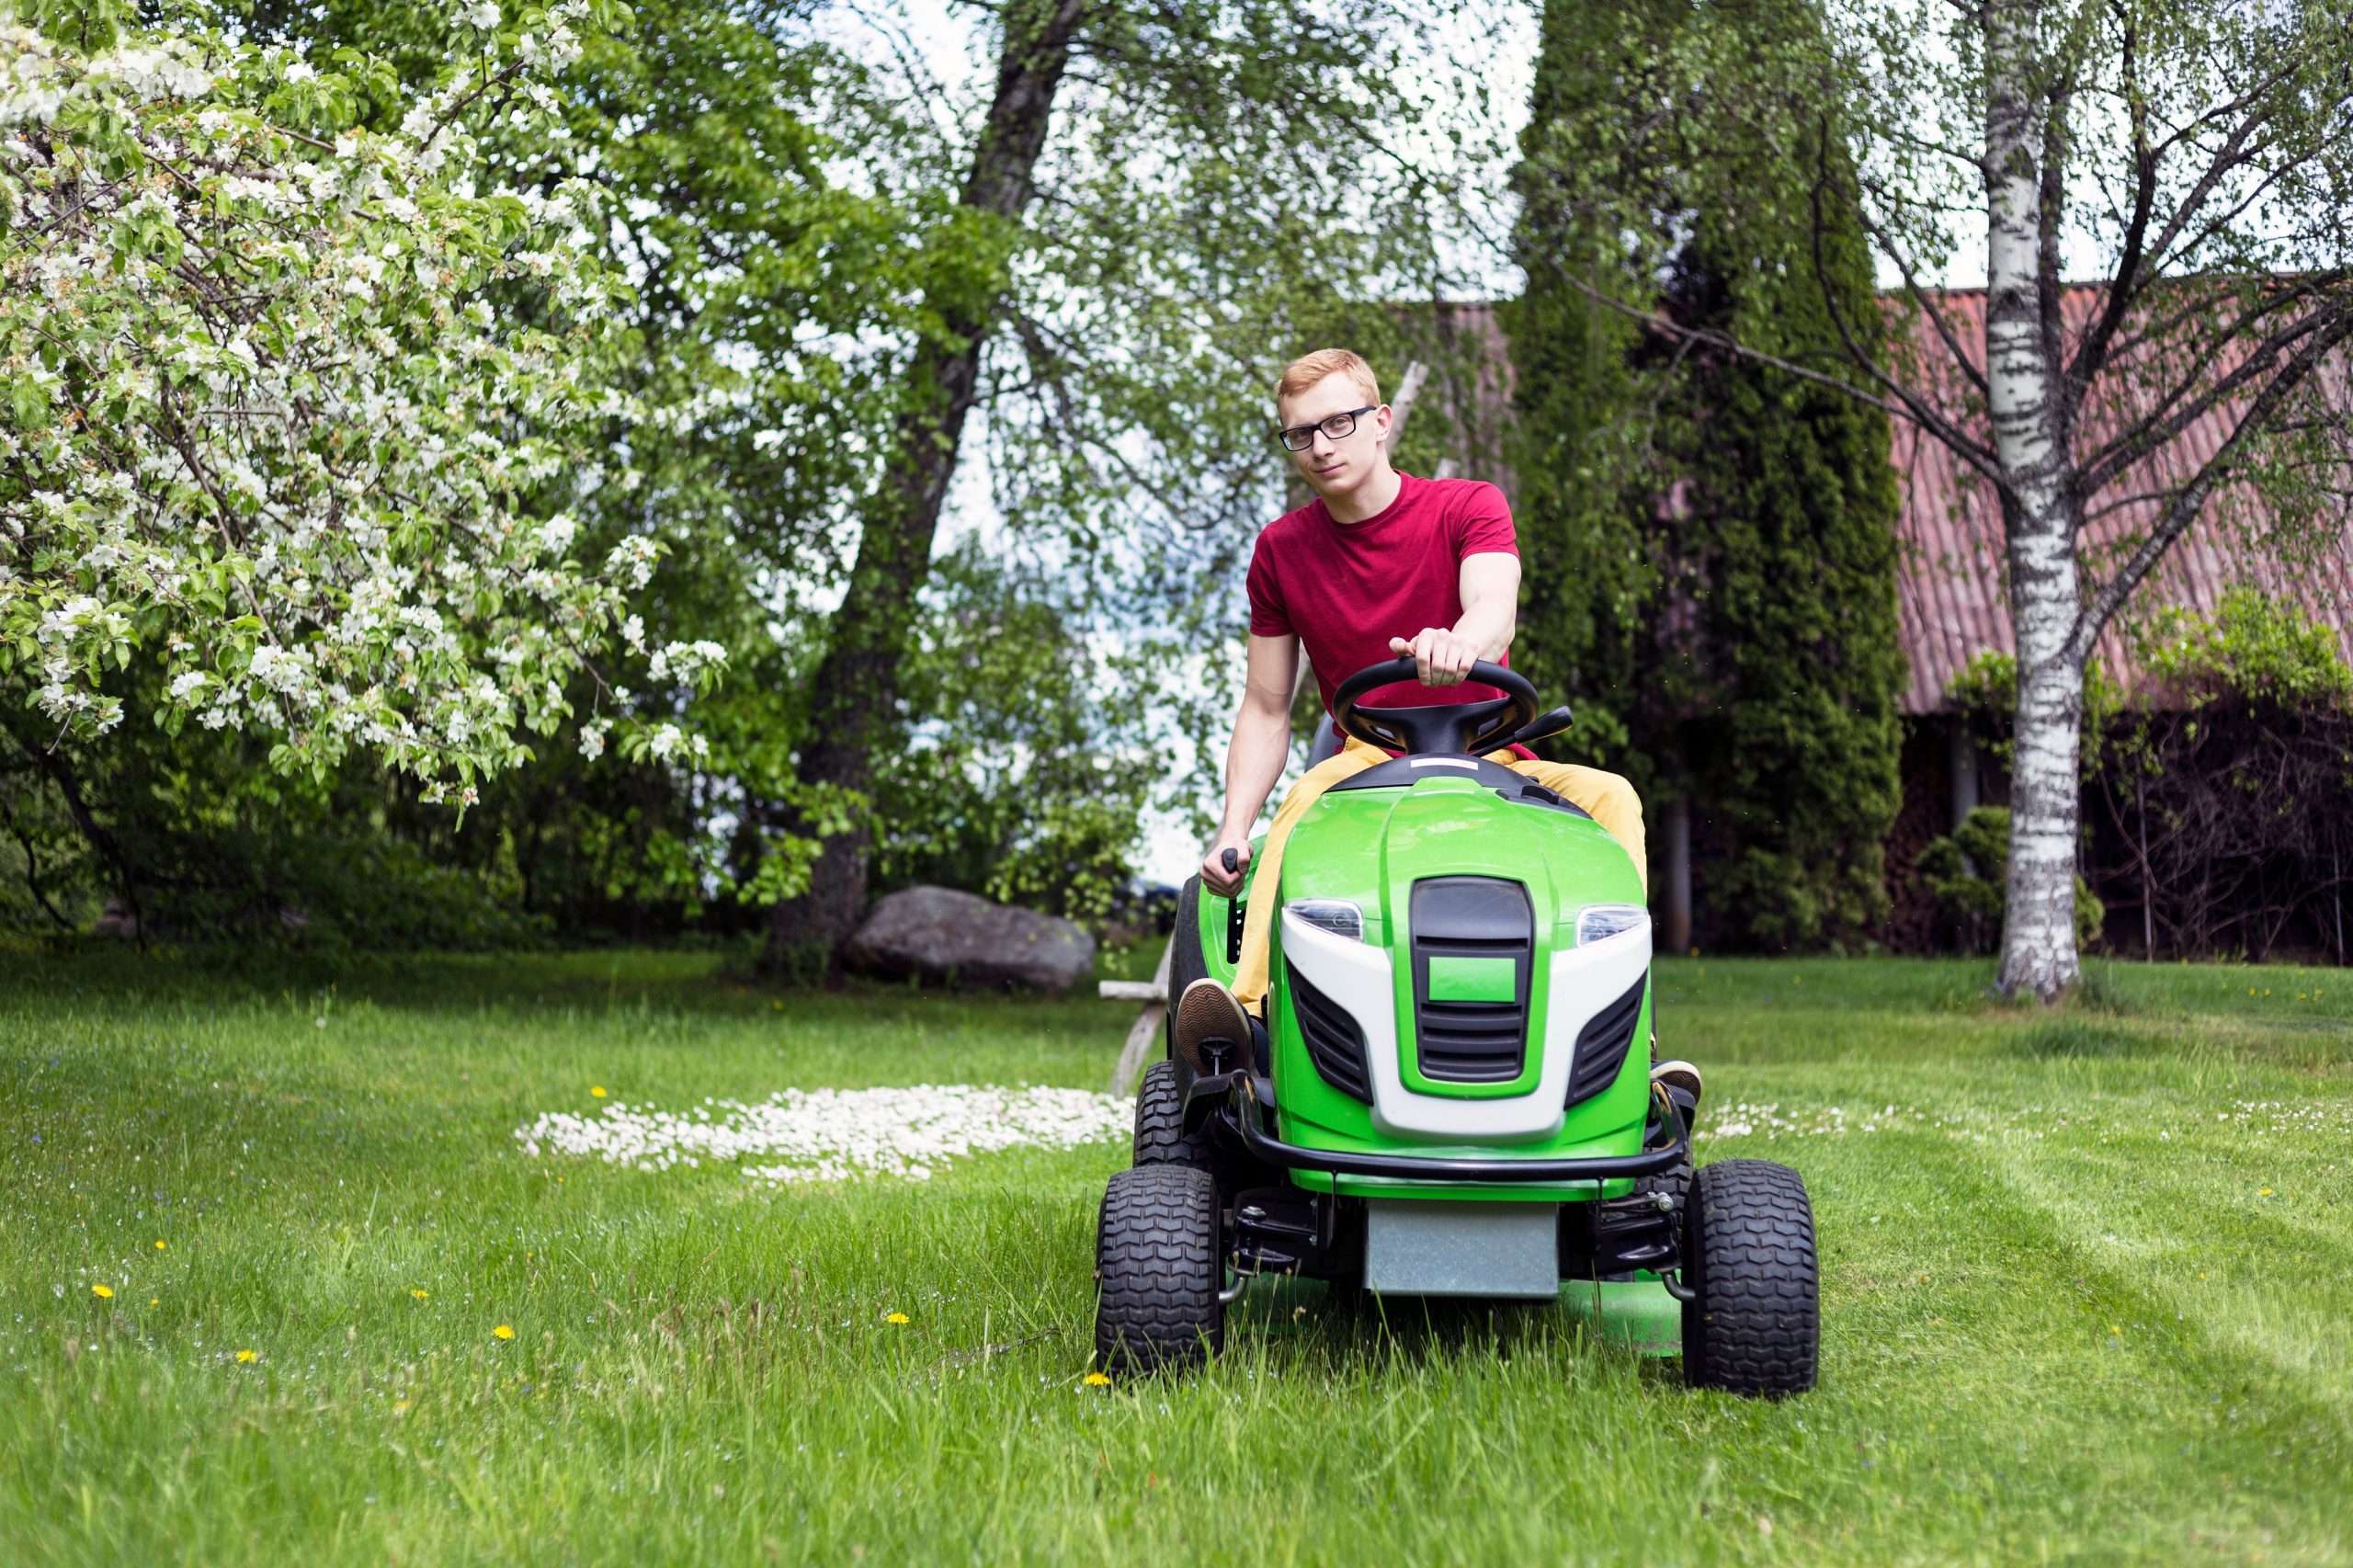 The 6 Best Riding Lawn Mowers to Buy in 2018